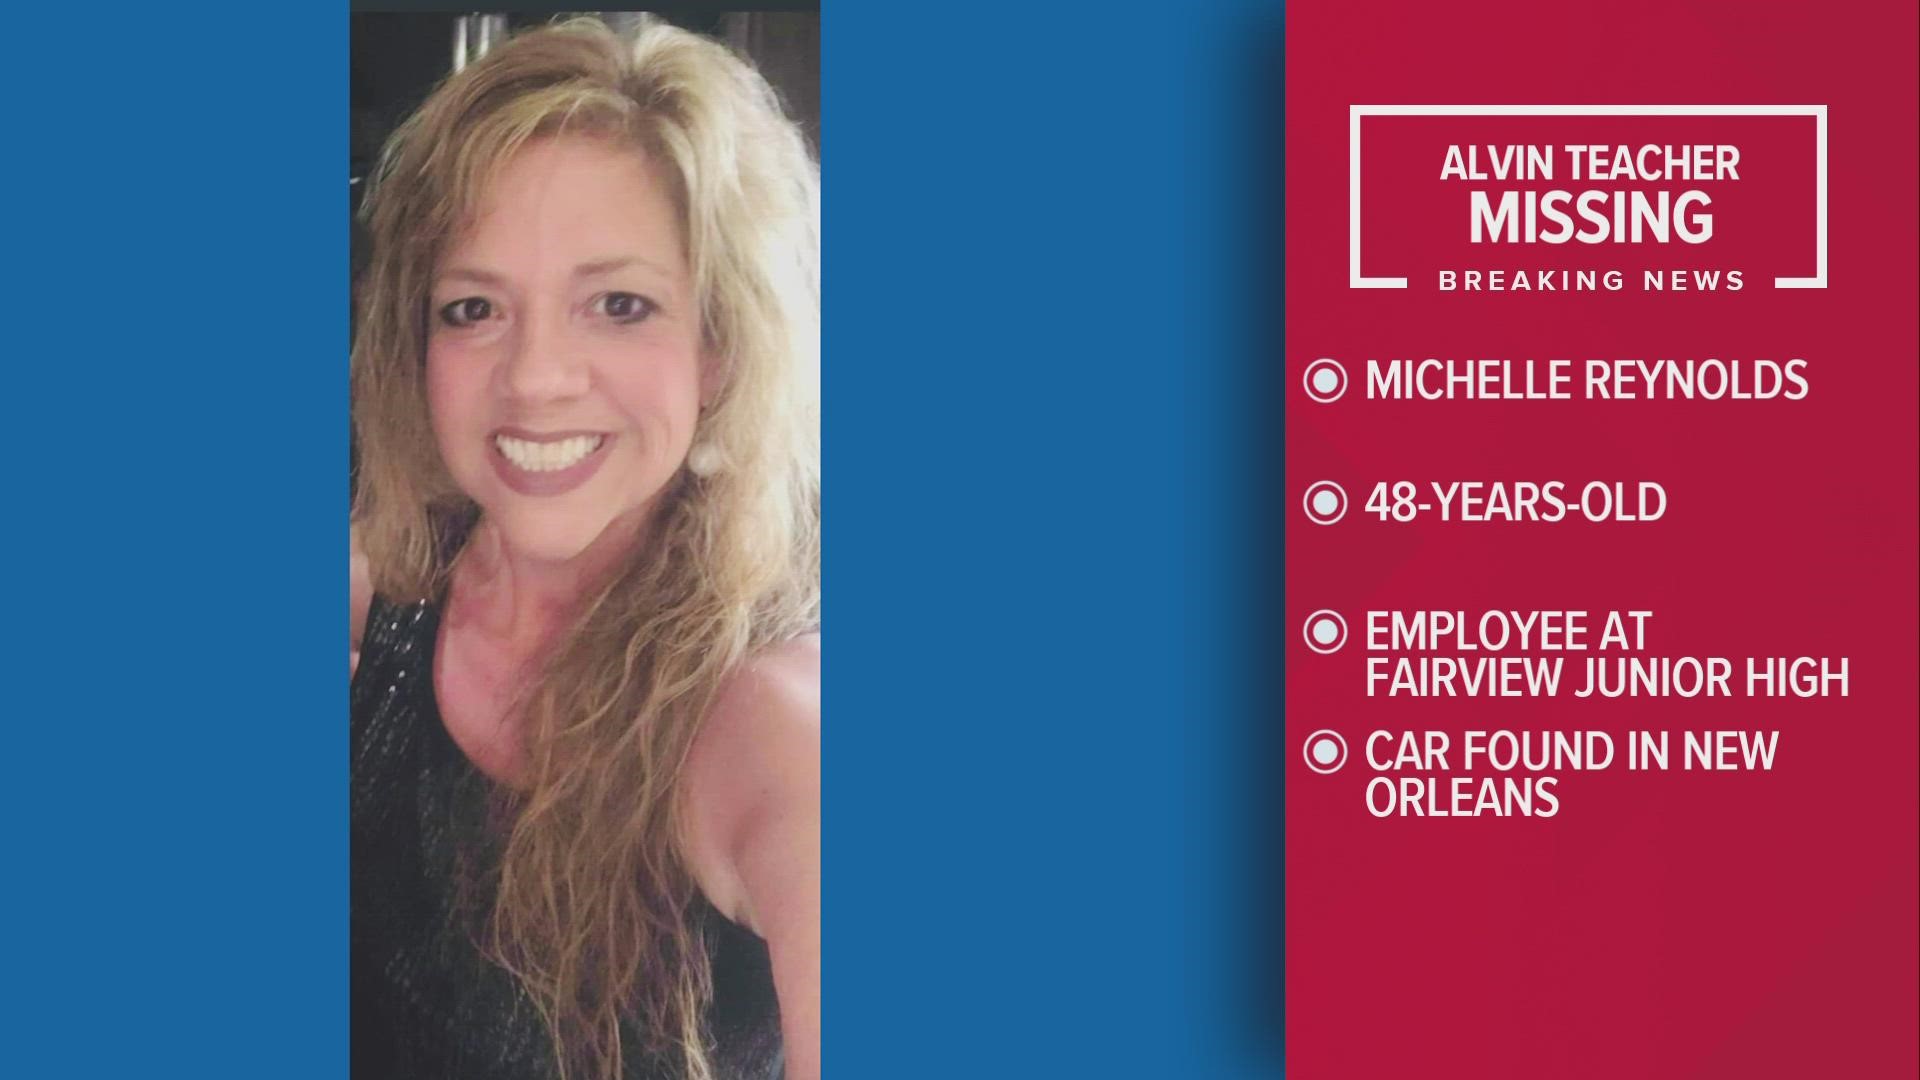 Michelle Reynolds has not been seen since Thursday, but her car was located in New Orleans on Monday.